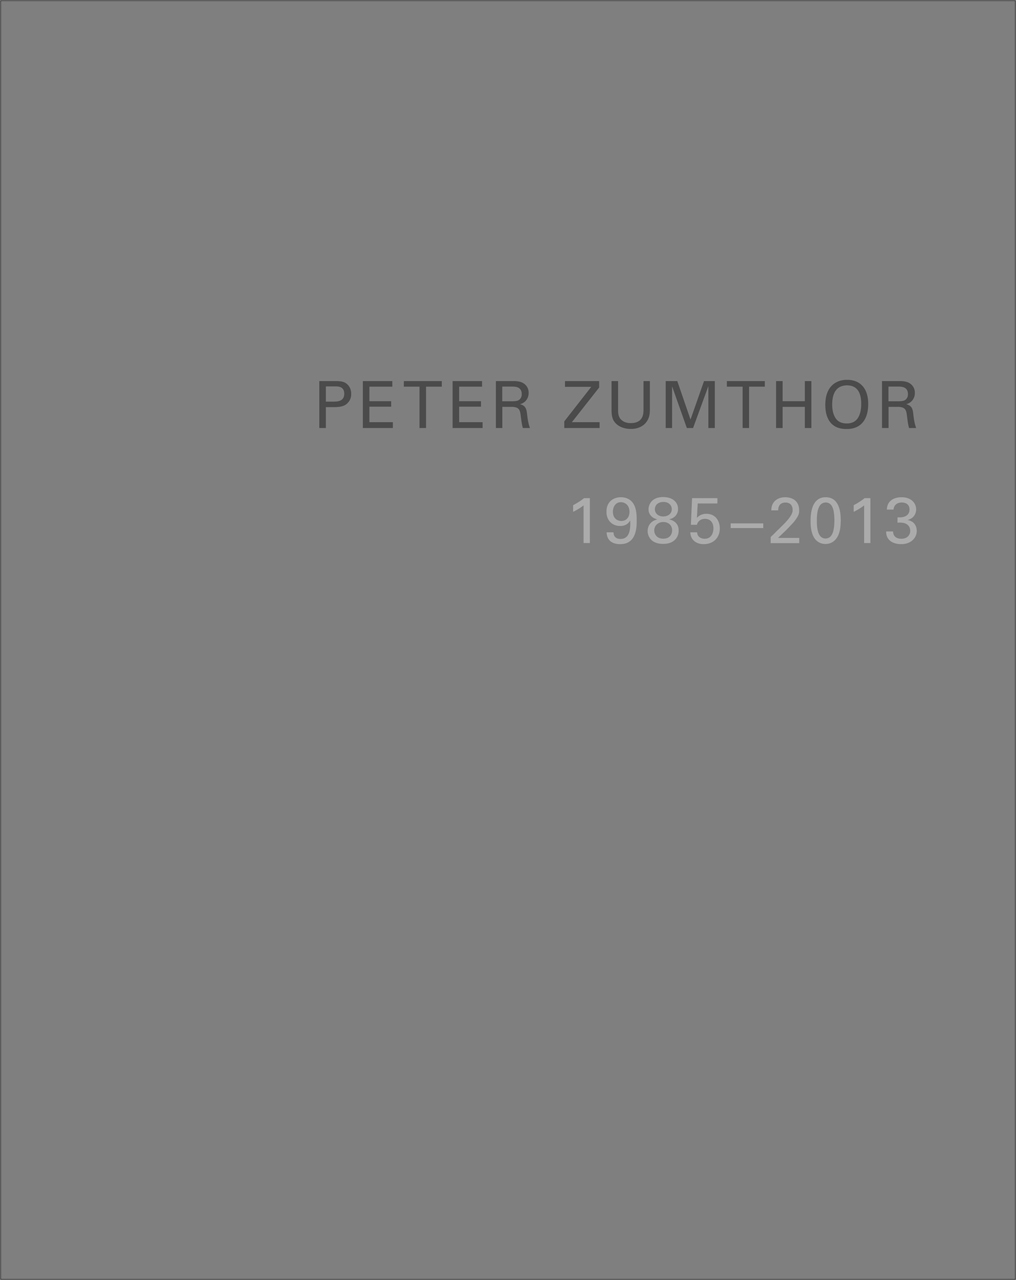 Peter Zumthor: Buildings and Projects 1985-2013, Durisch, Zumthor